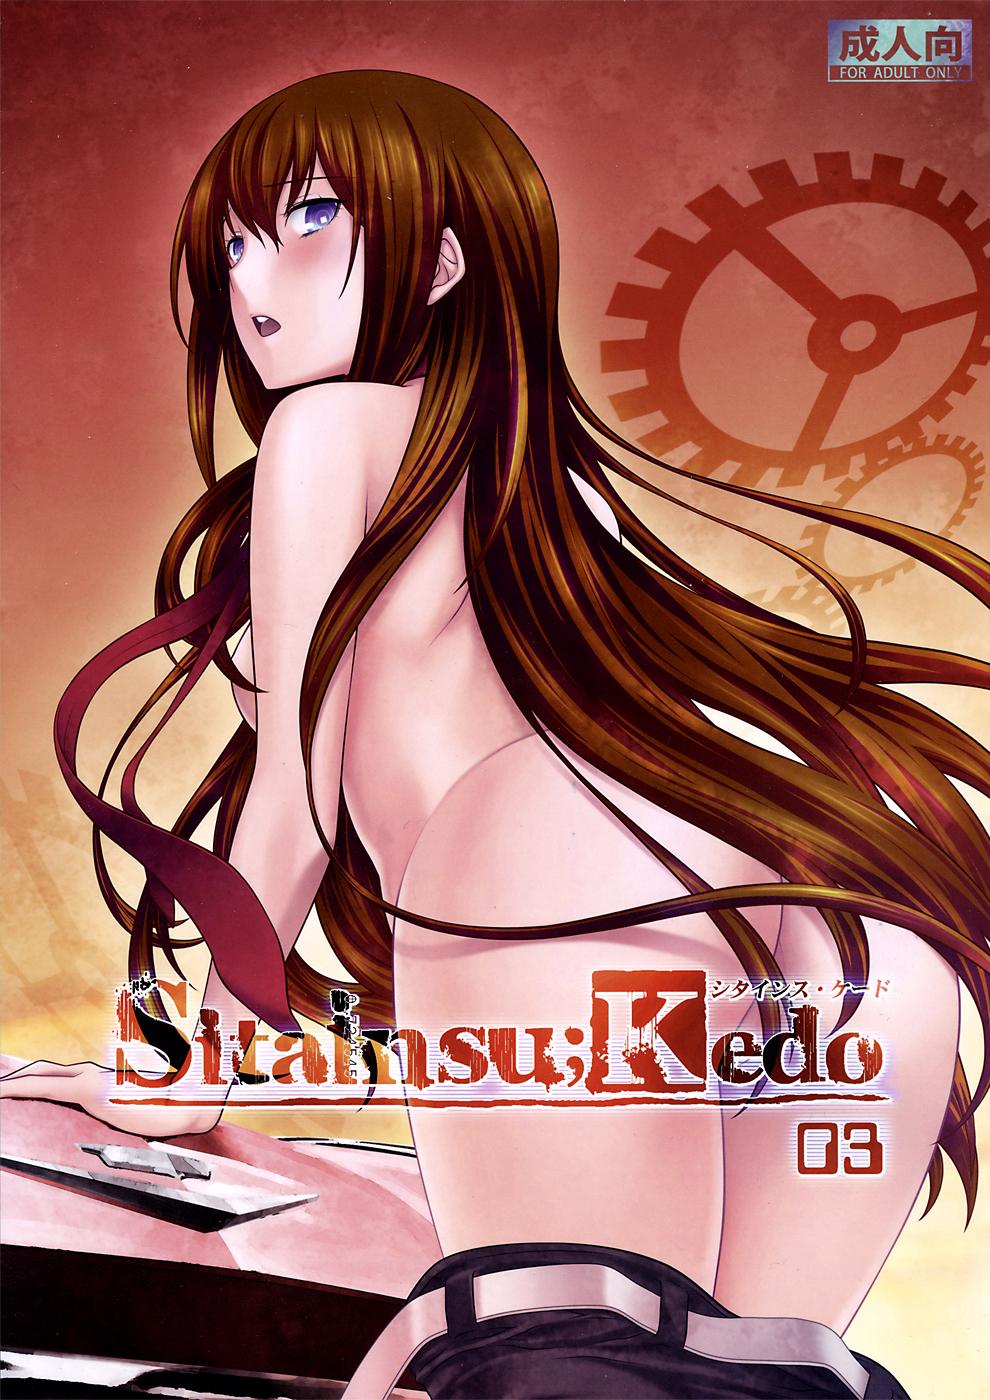 Wild Sitainsu;Kedo 03 - Steinsgate Brother Sister - Picture 1